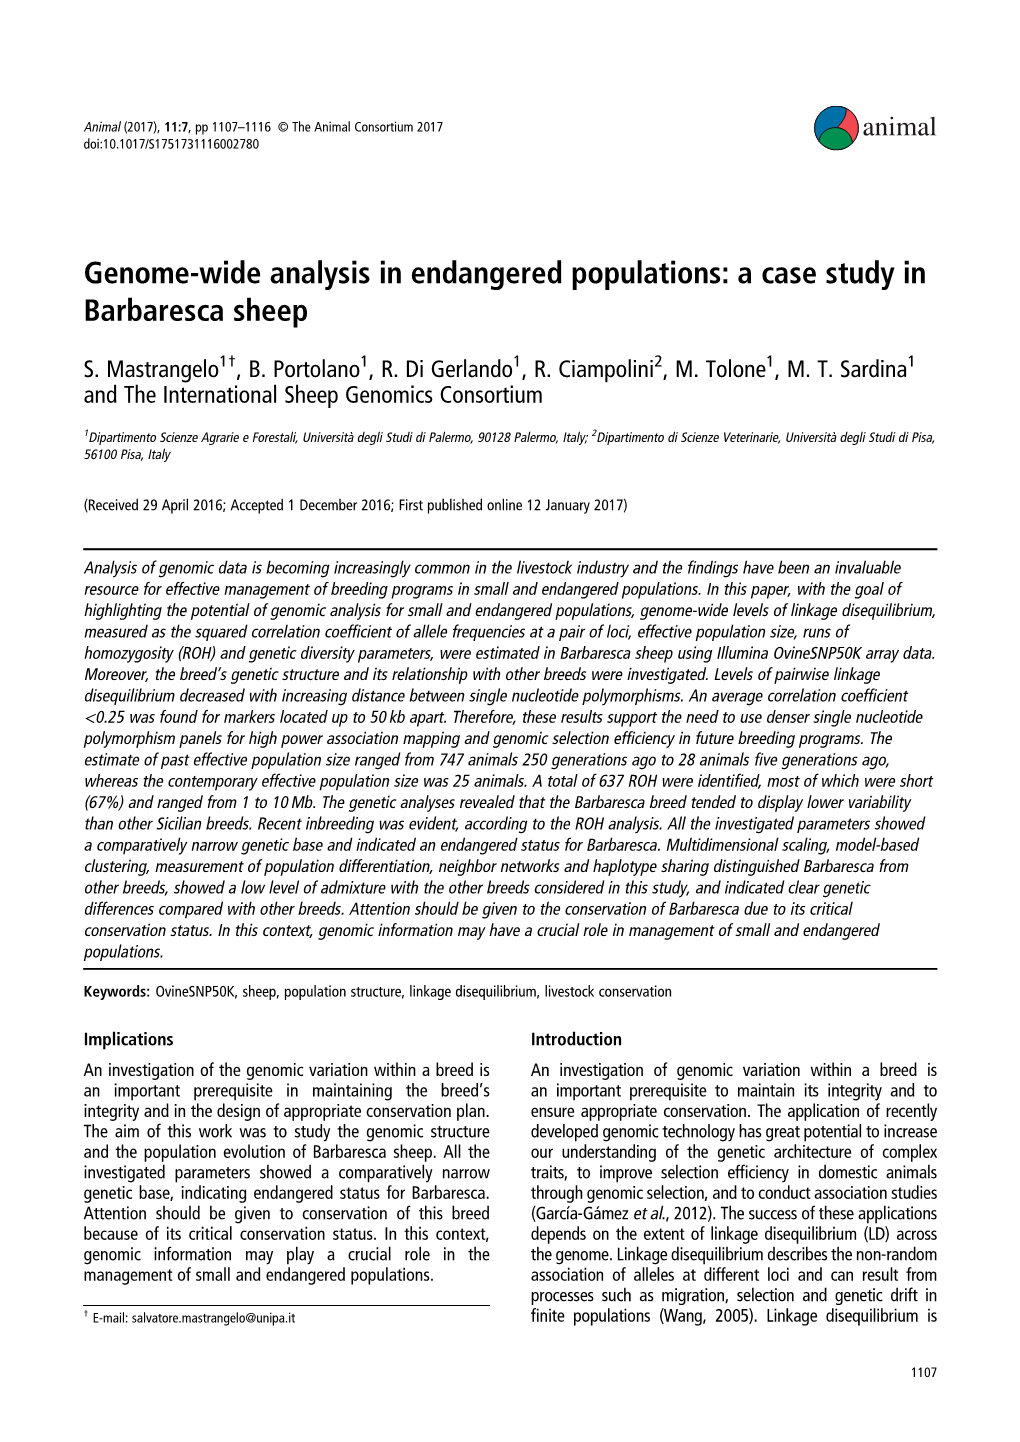 Genome-Wide Analysis in Endangered Populations: a Case Study in Barbaresca Sheep